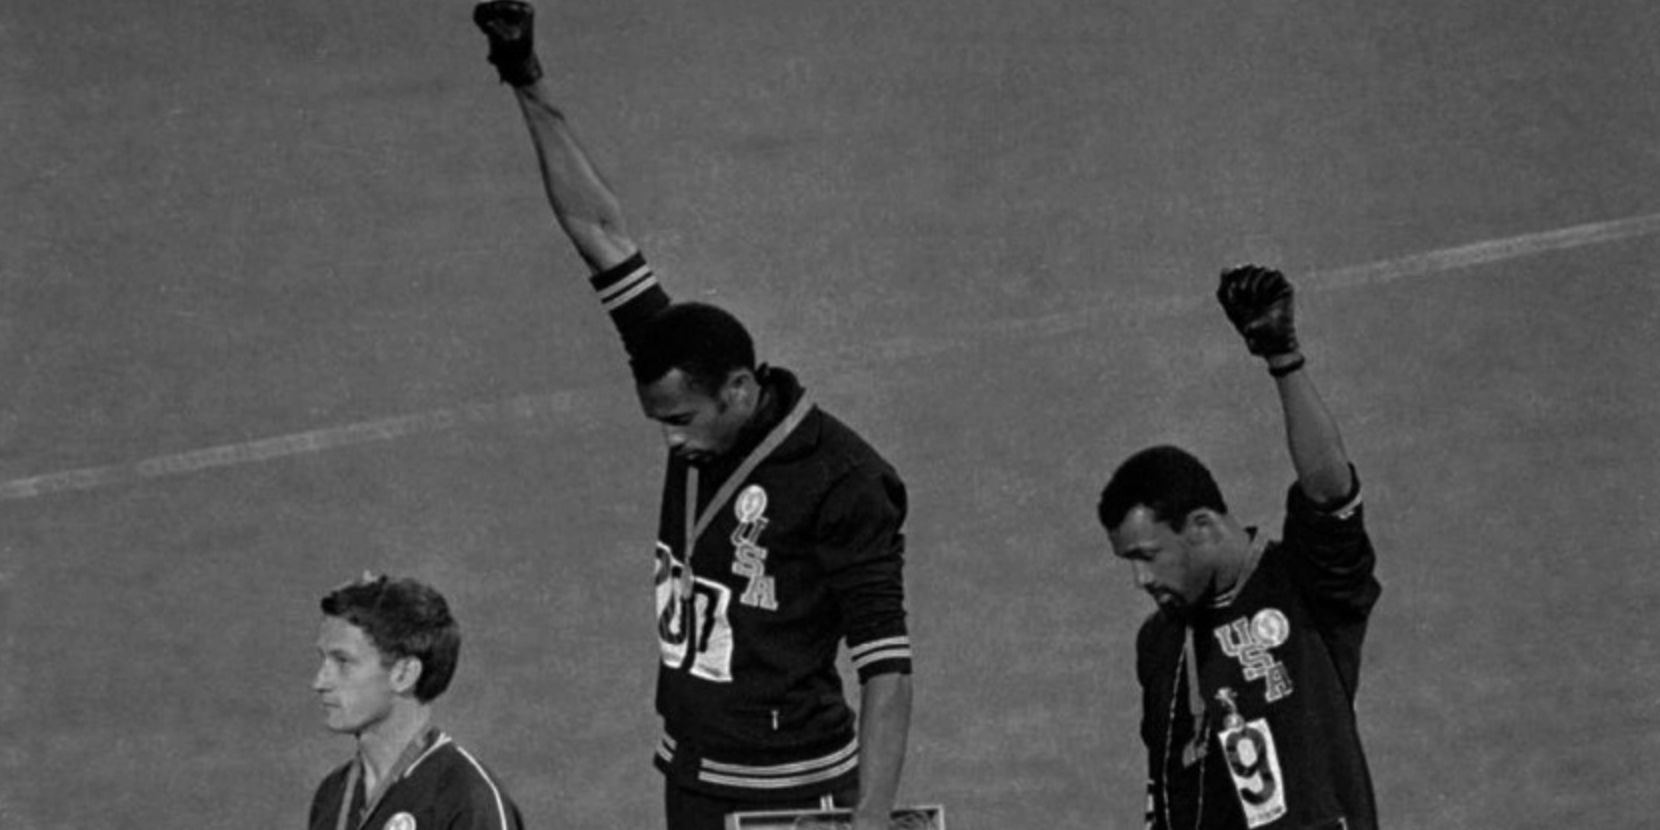 peter norman tommie smith and john carlos at the 1968 olympic games